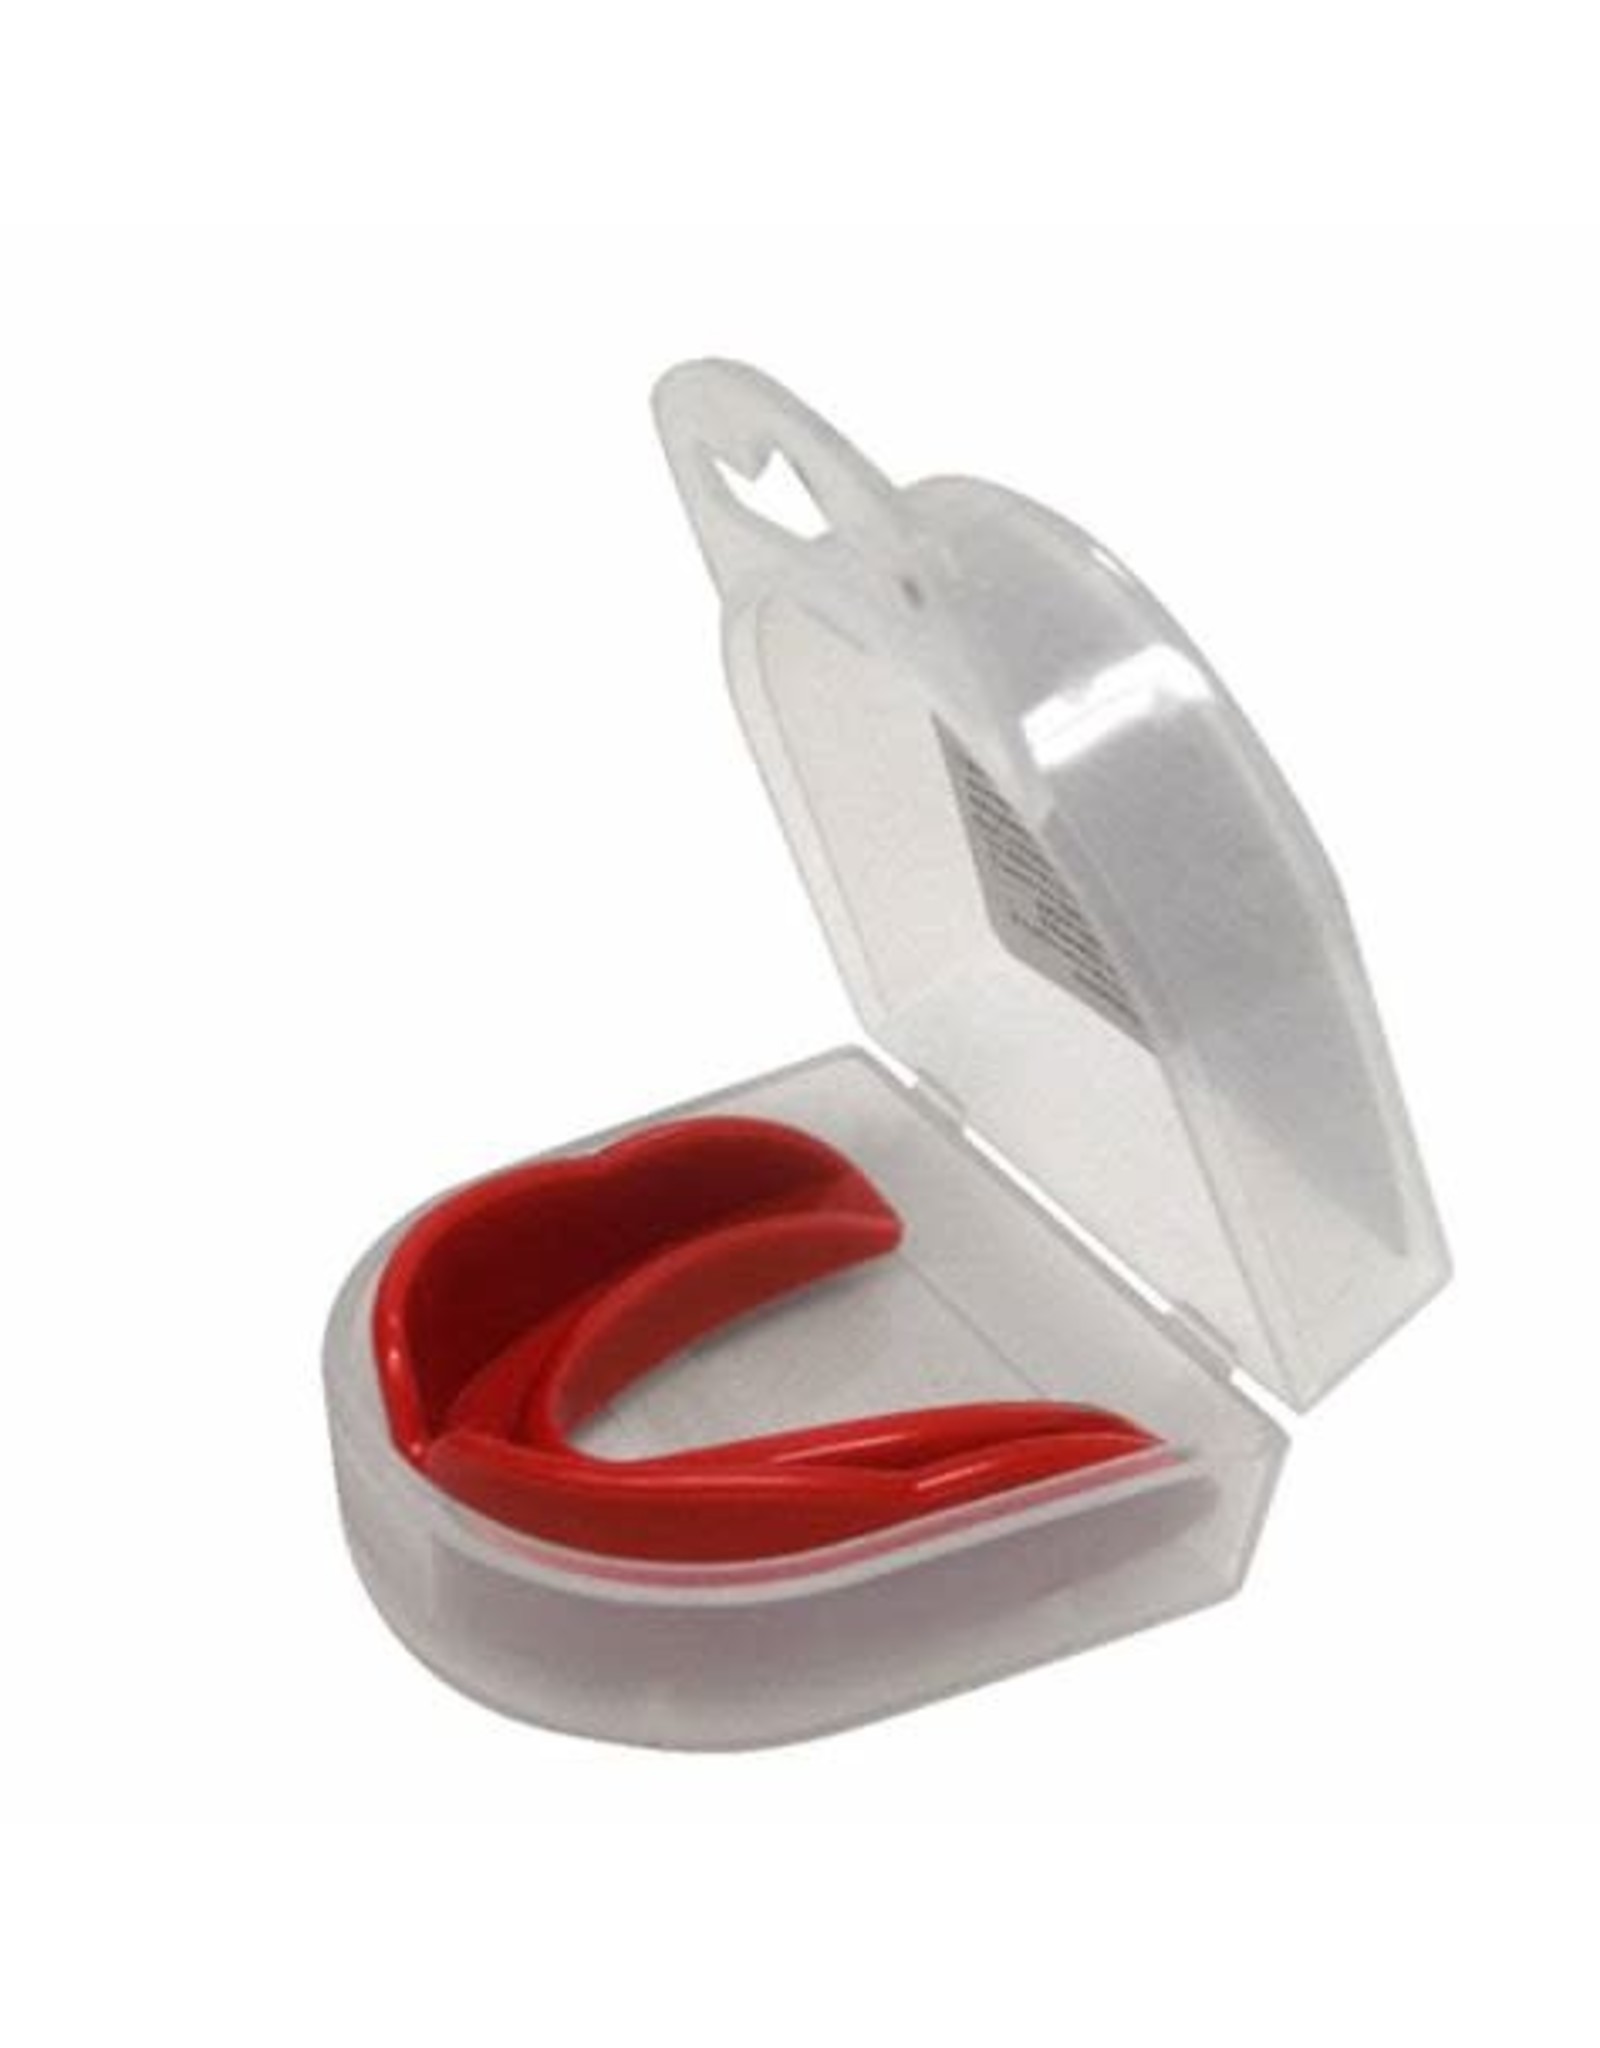 Mouth Guard and Case